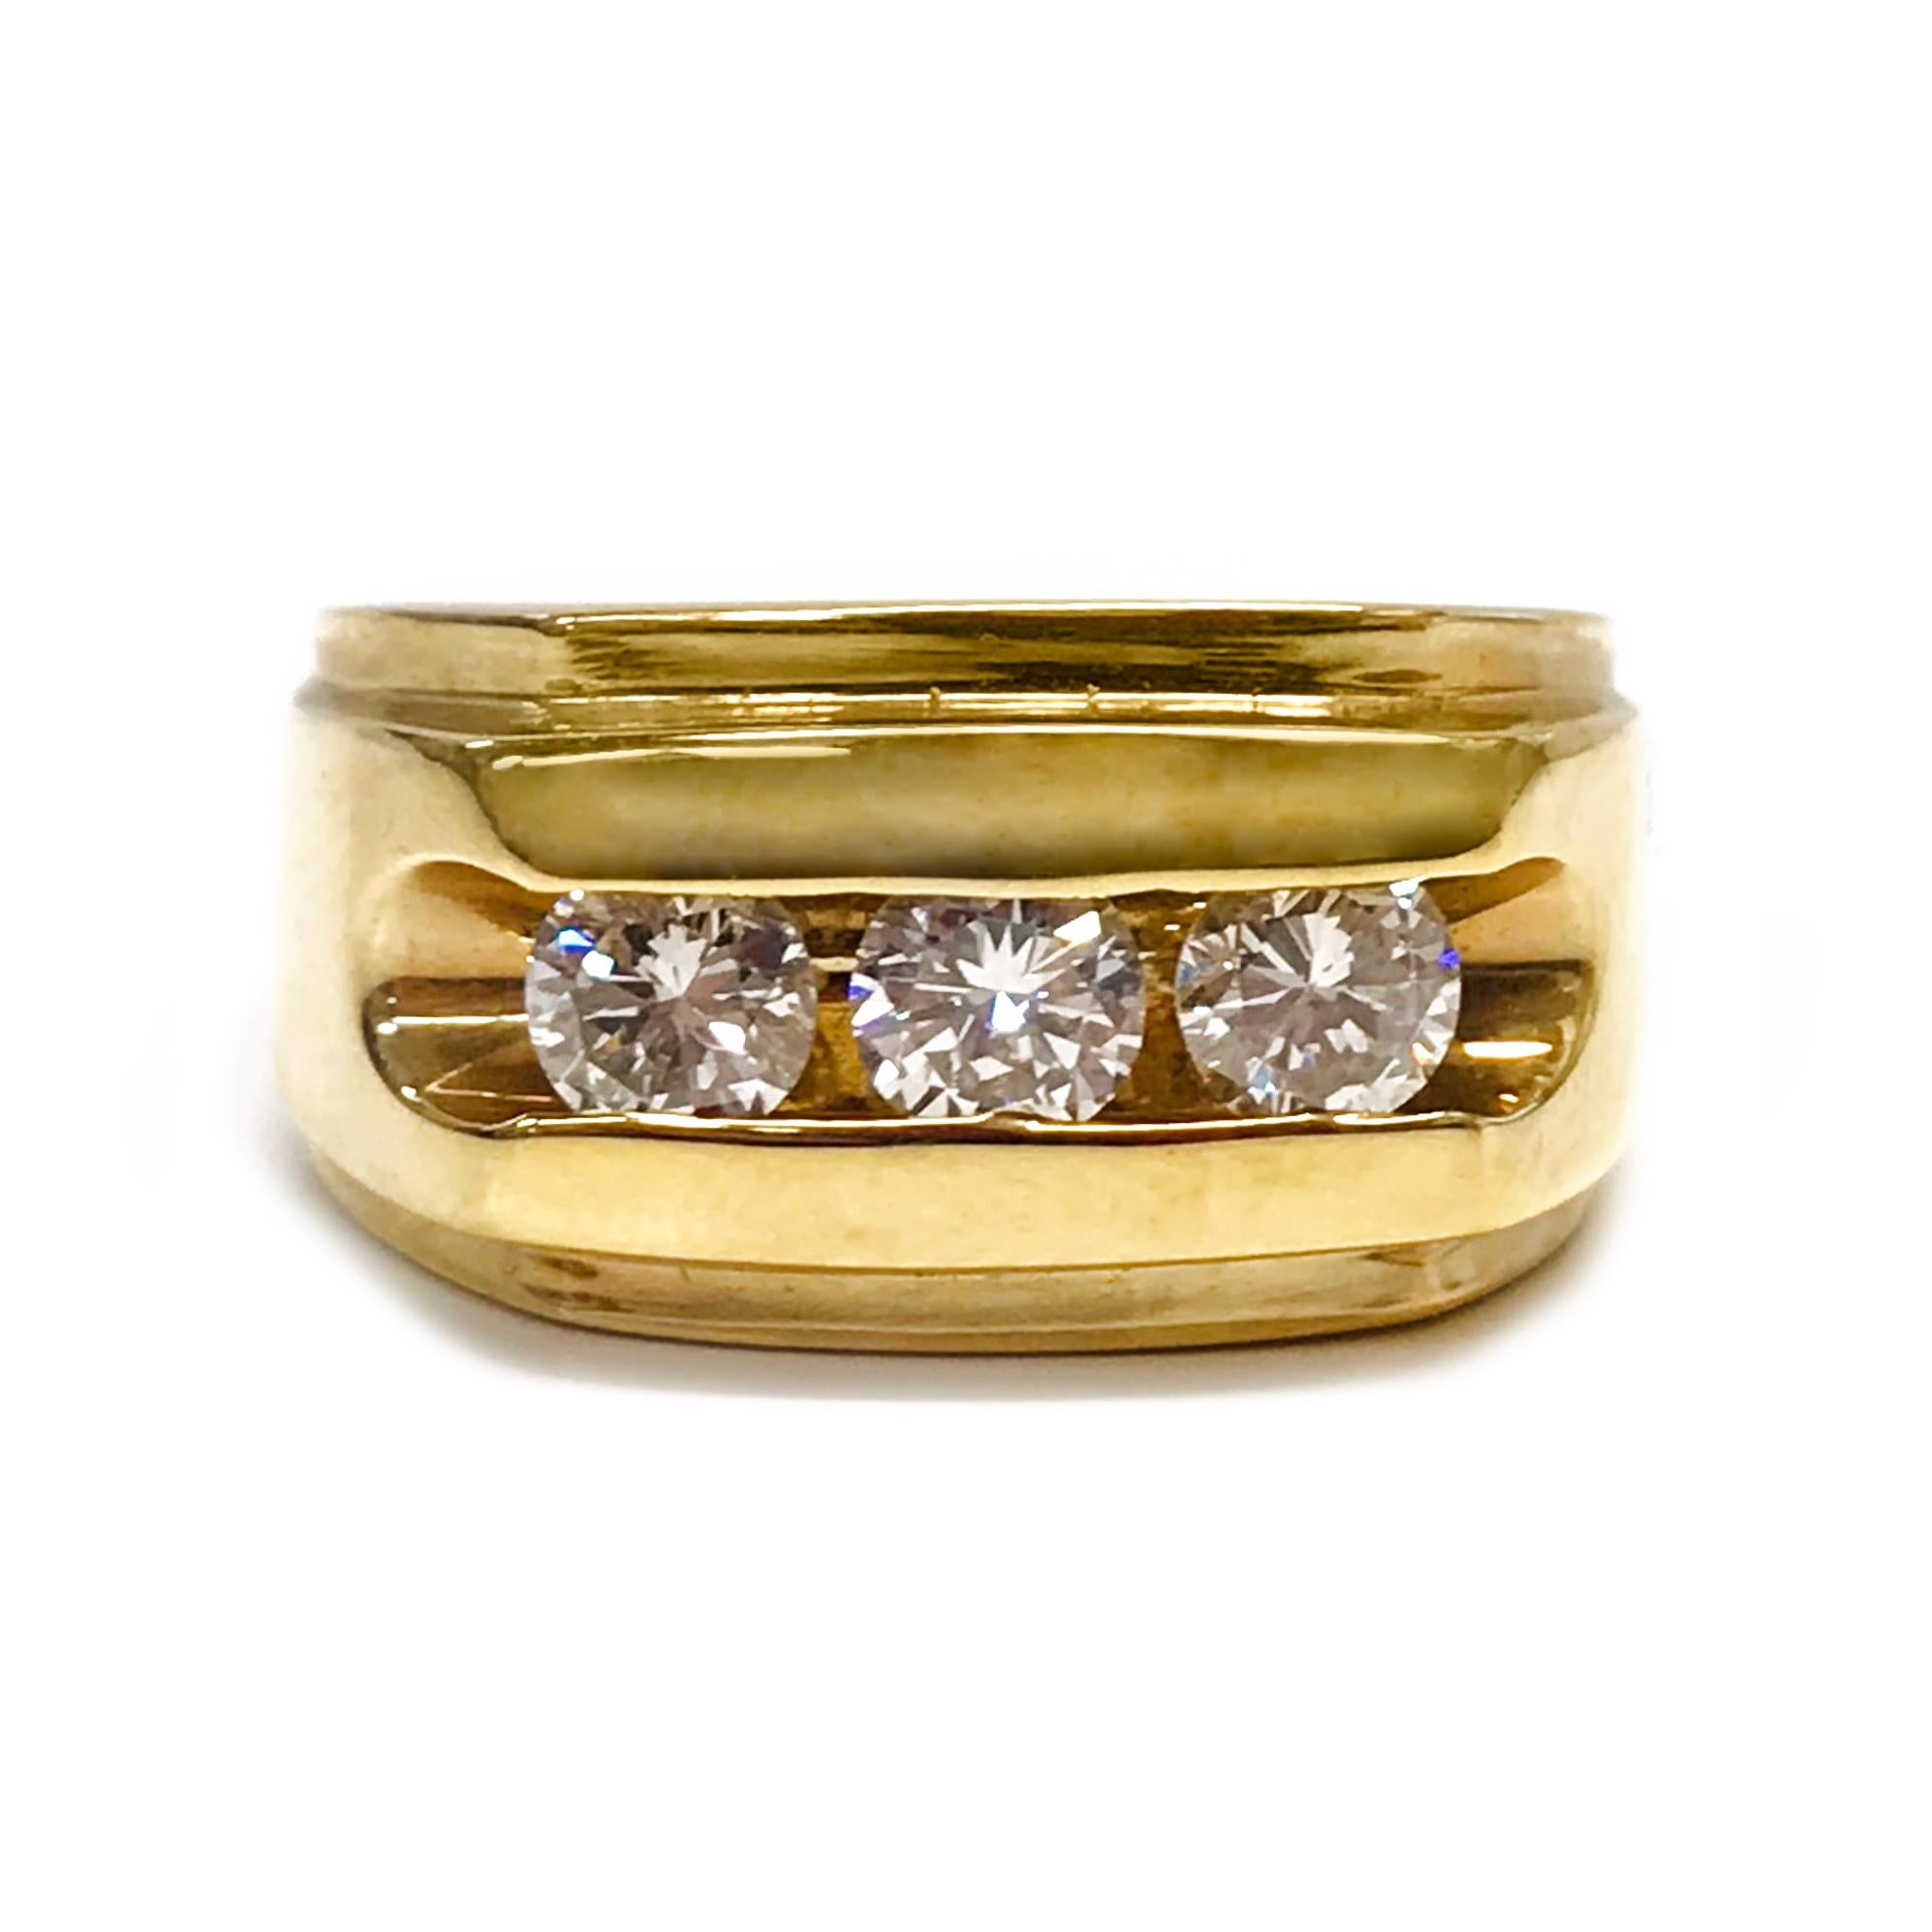 14 Karat Three Diamond Wide ring. The ring features a wide band that tapers and three round diamonds channel-set in the center. The diamonds have a total carat weight of 0.75ctw. Stamped on the inside of the band is 14K IGM. The ring size is 9 1/4